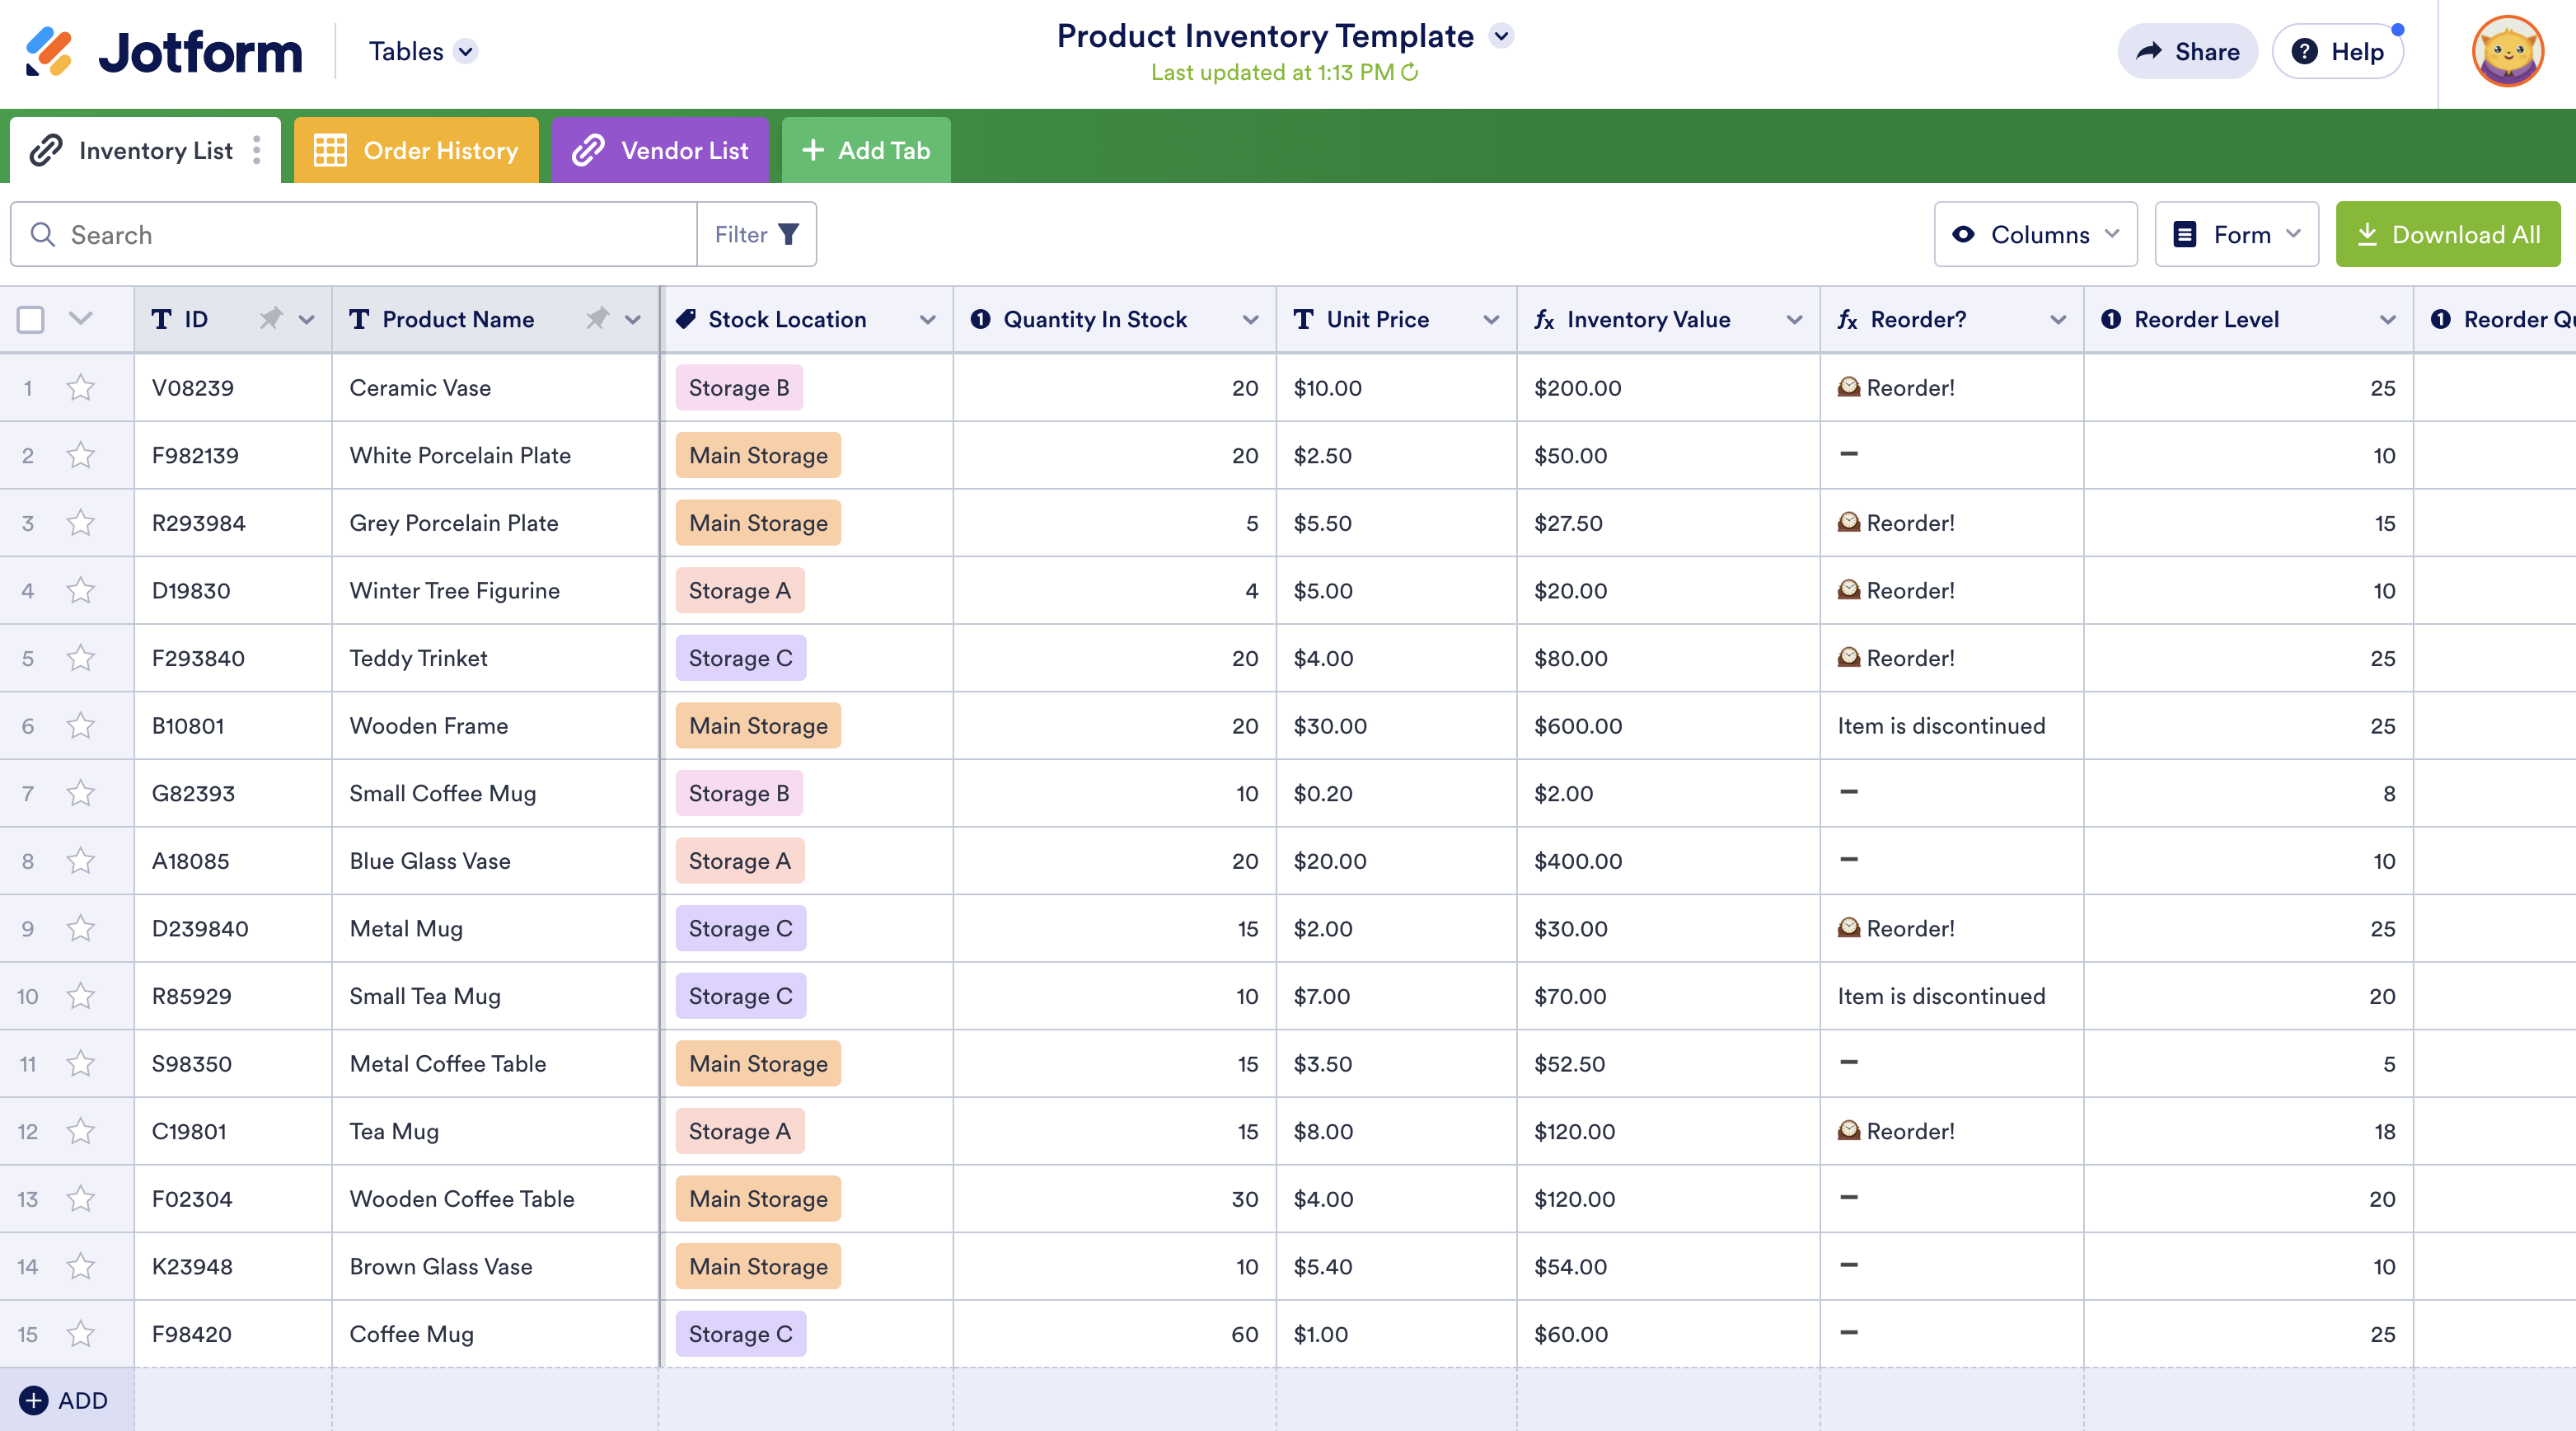 Managing your year-end inventory with Jotform Tables | The Jotform Blog